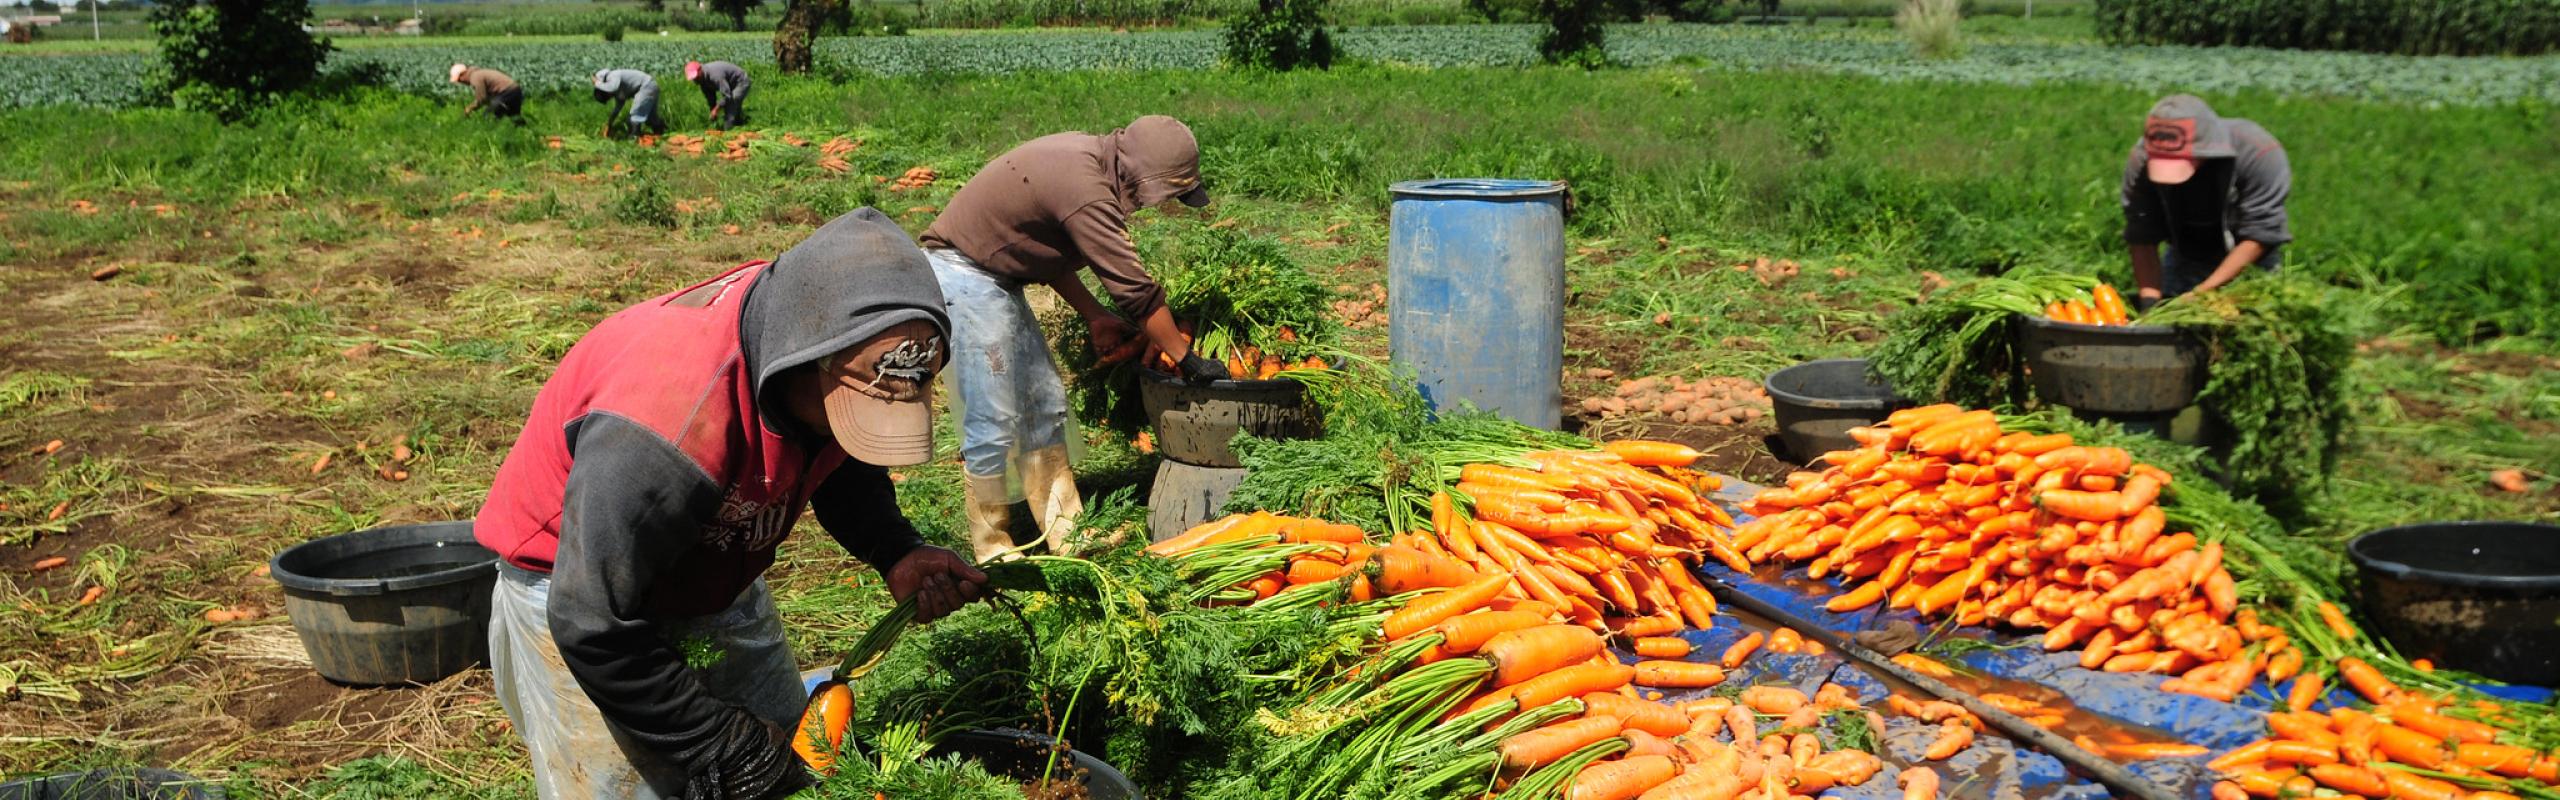 Workers collect carrots in a farm in Chimaltenango, Guatemala.